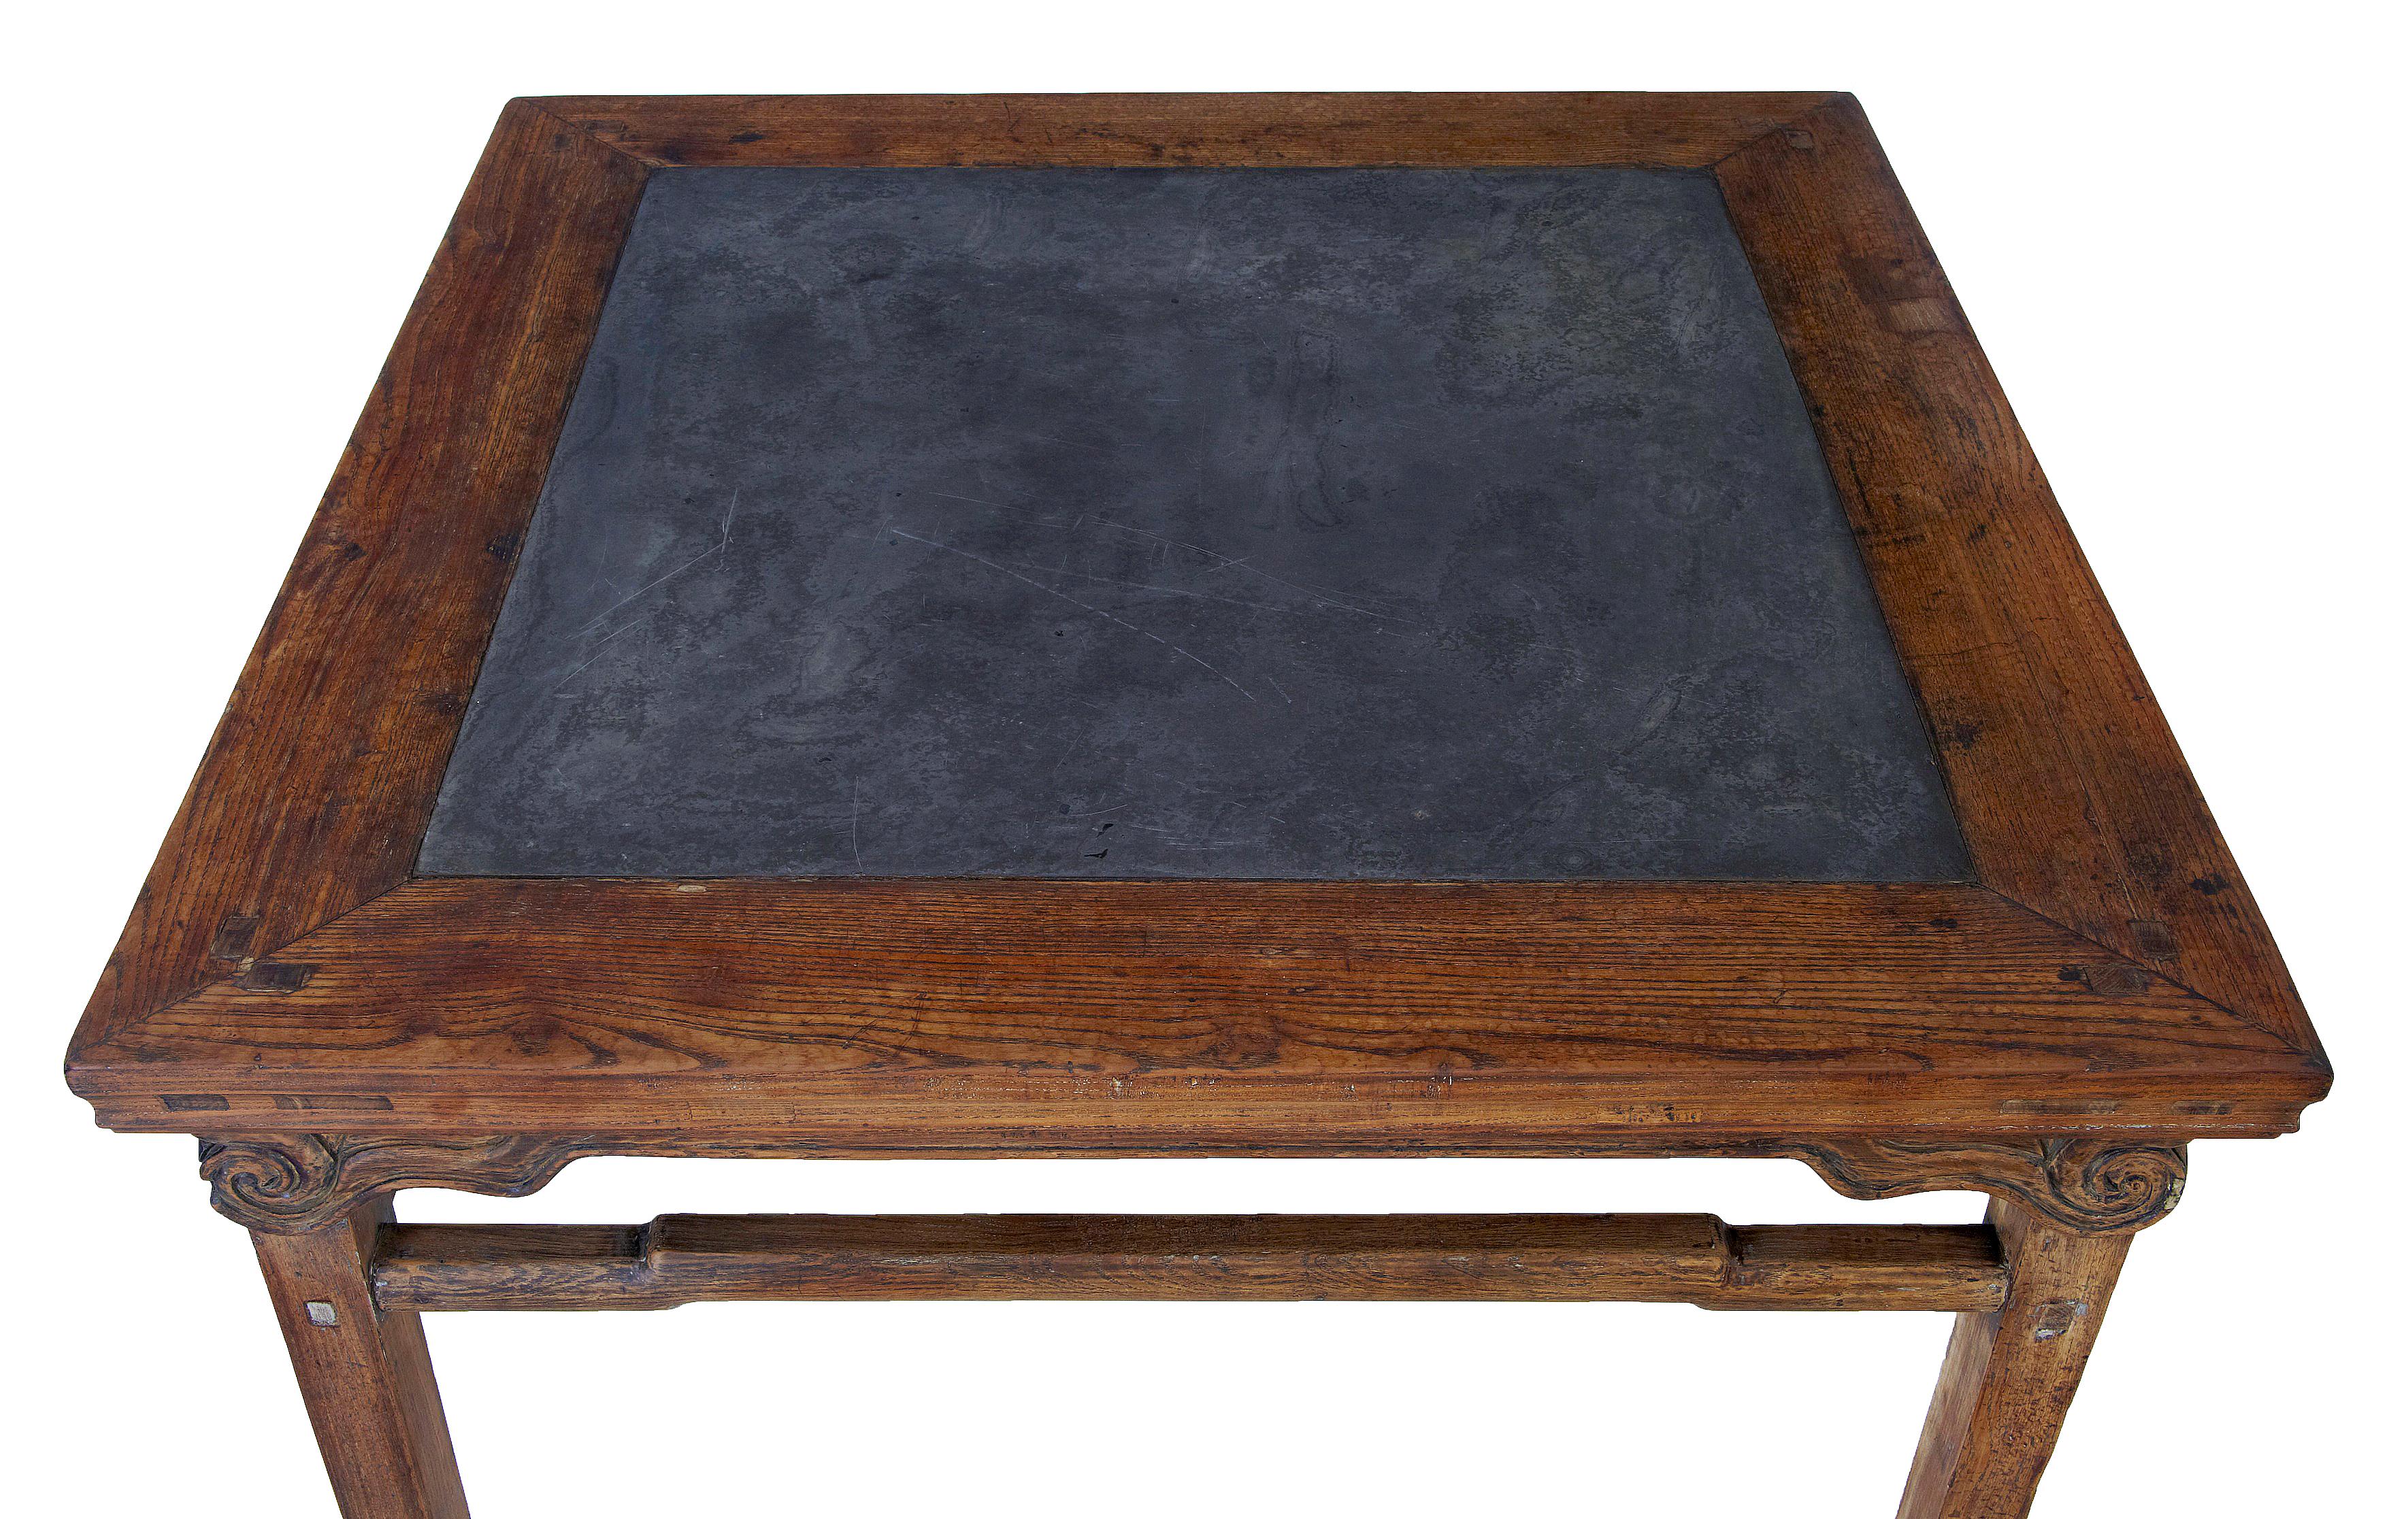 Chinese Export Large 19th Century Chinese Hard Wood Marble Inset Table